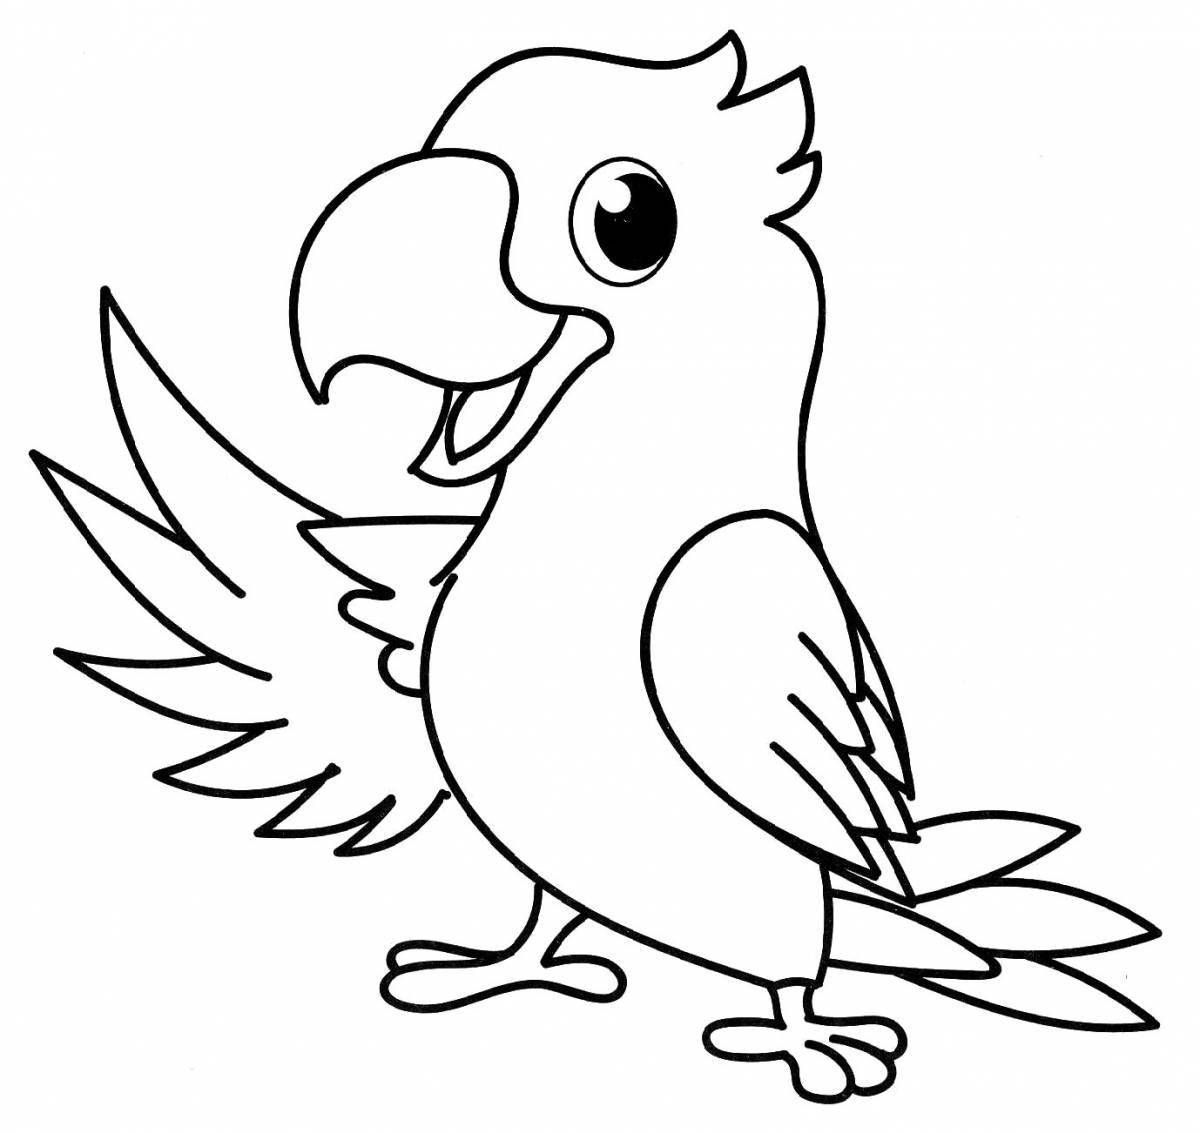 Fabulous parrot coloring book for children 6-7 years old